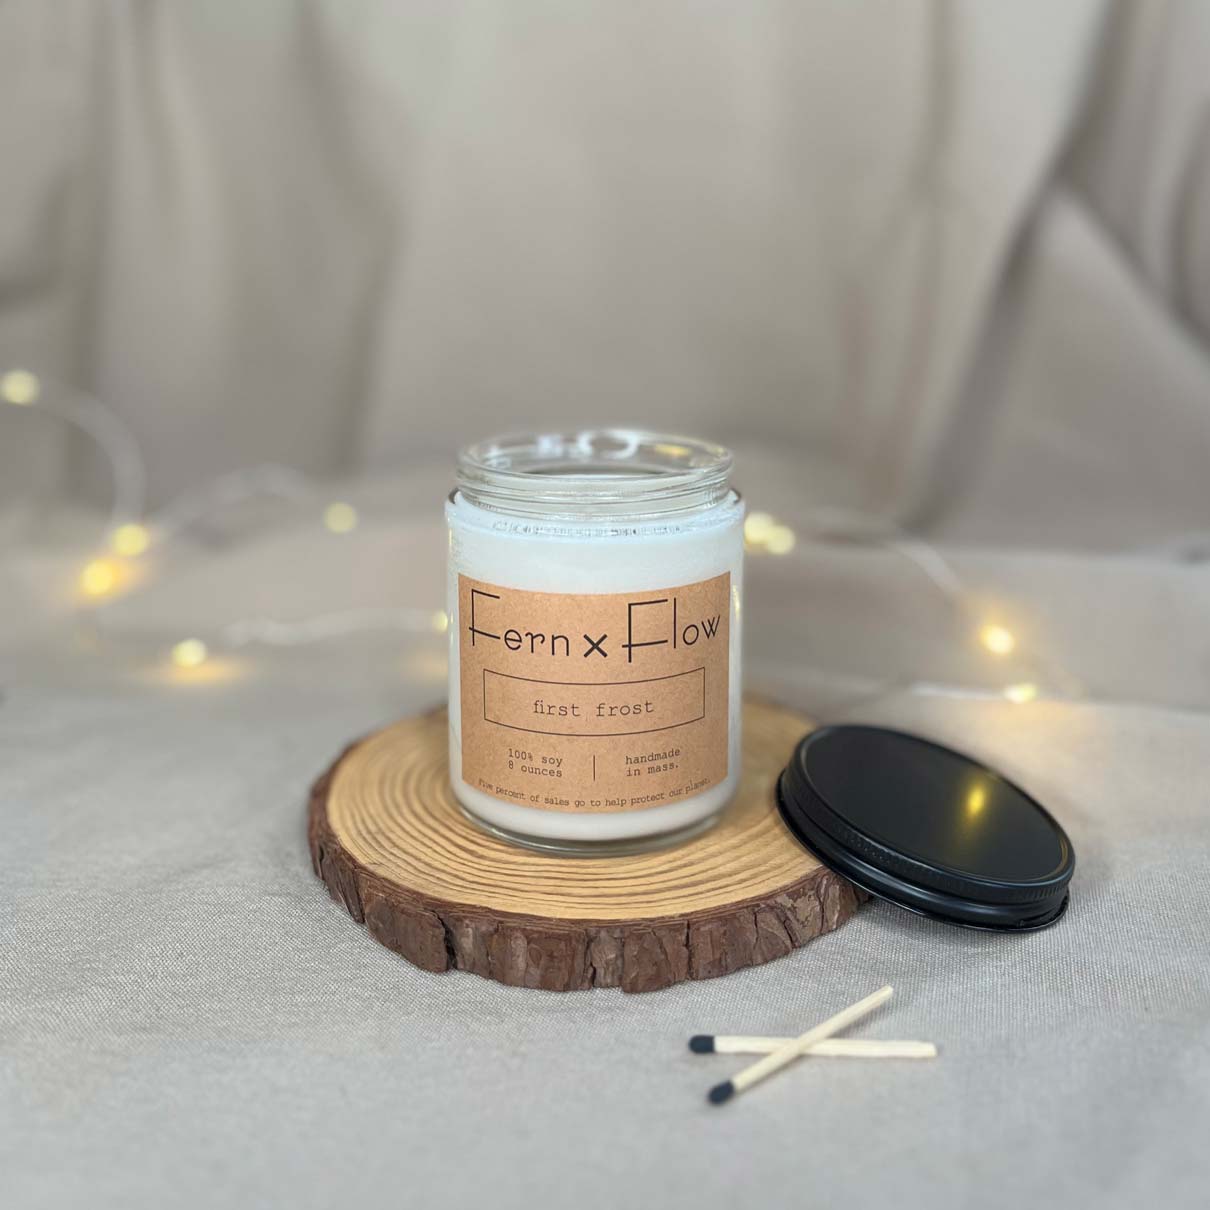 
                  
                    Fern x Flow eight-ounce First Frost scented soy candle on a rustic wooden riser with Christmas lights out-of-focus in the background.
                  
                